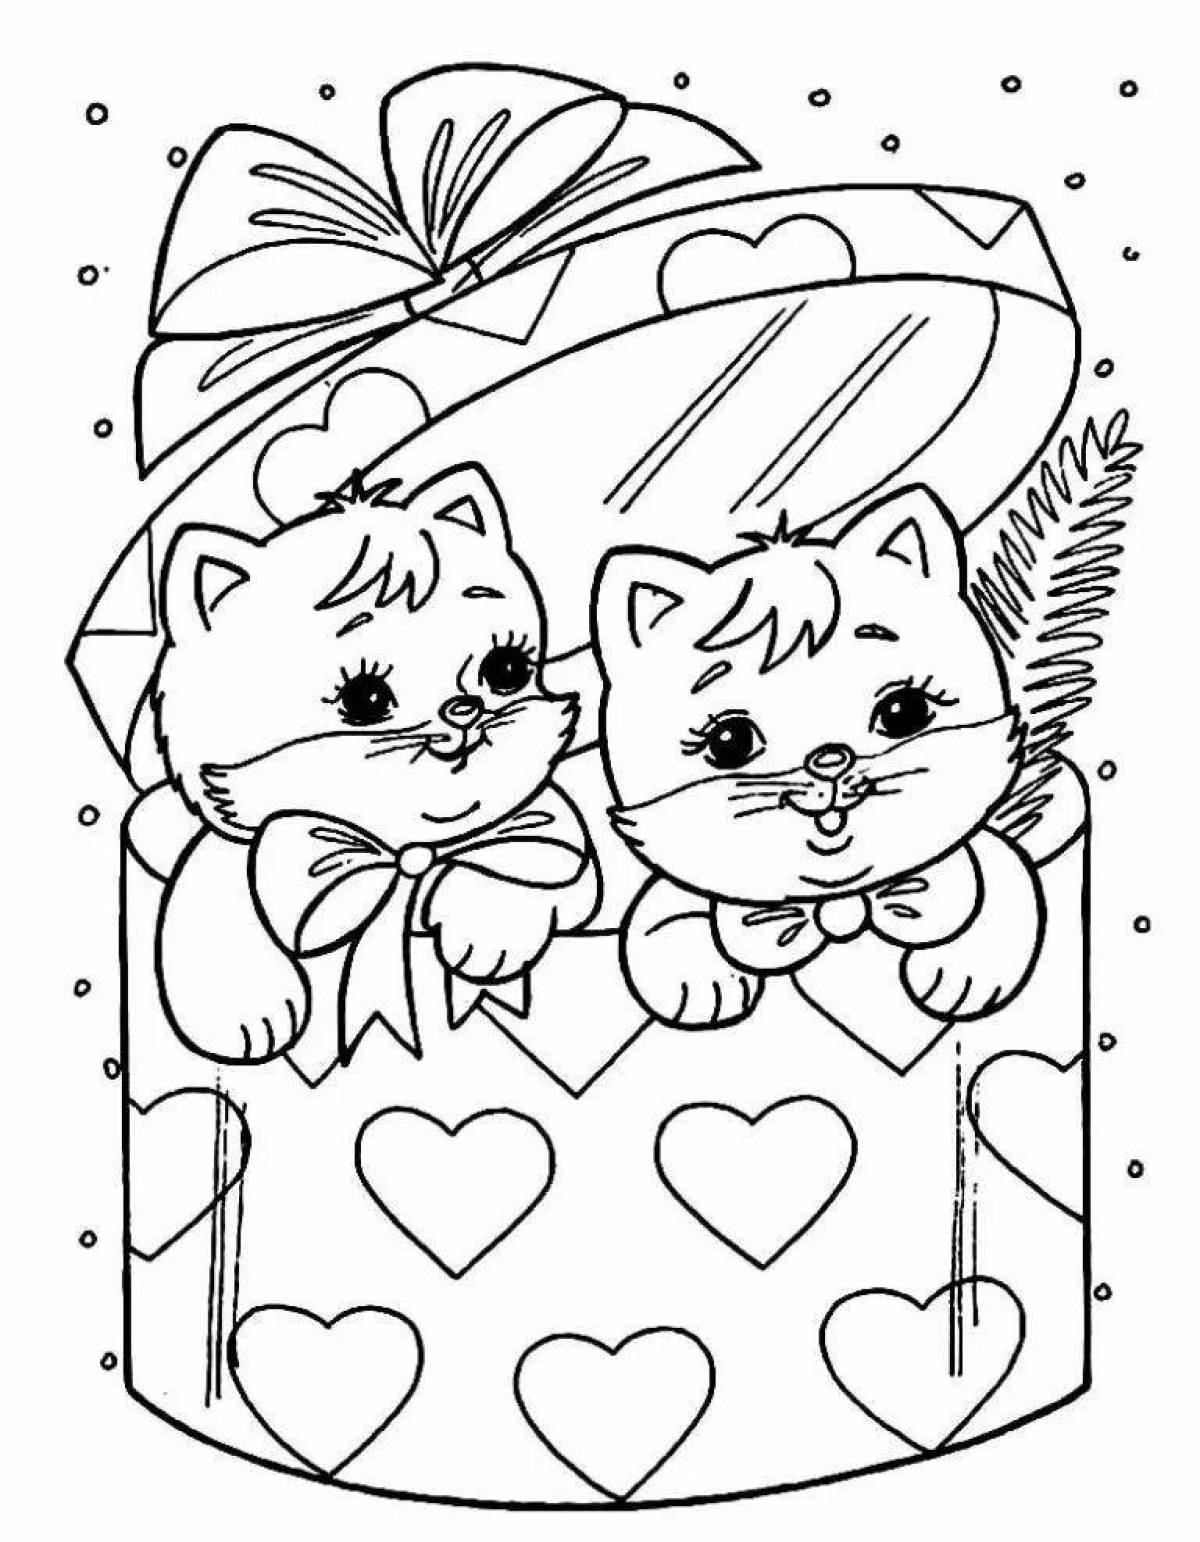 Outstanding coloring book for 6-7 year olds with cats